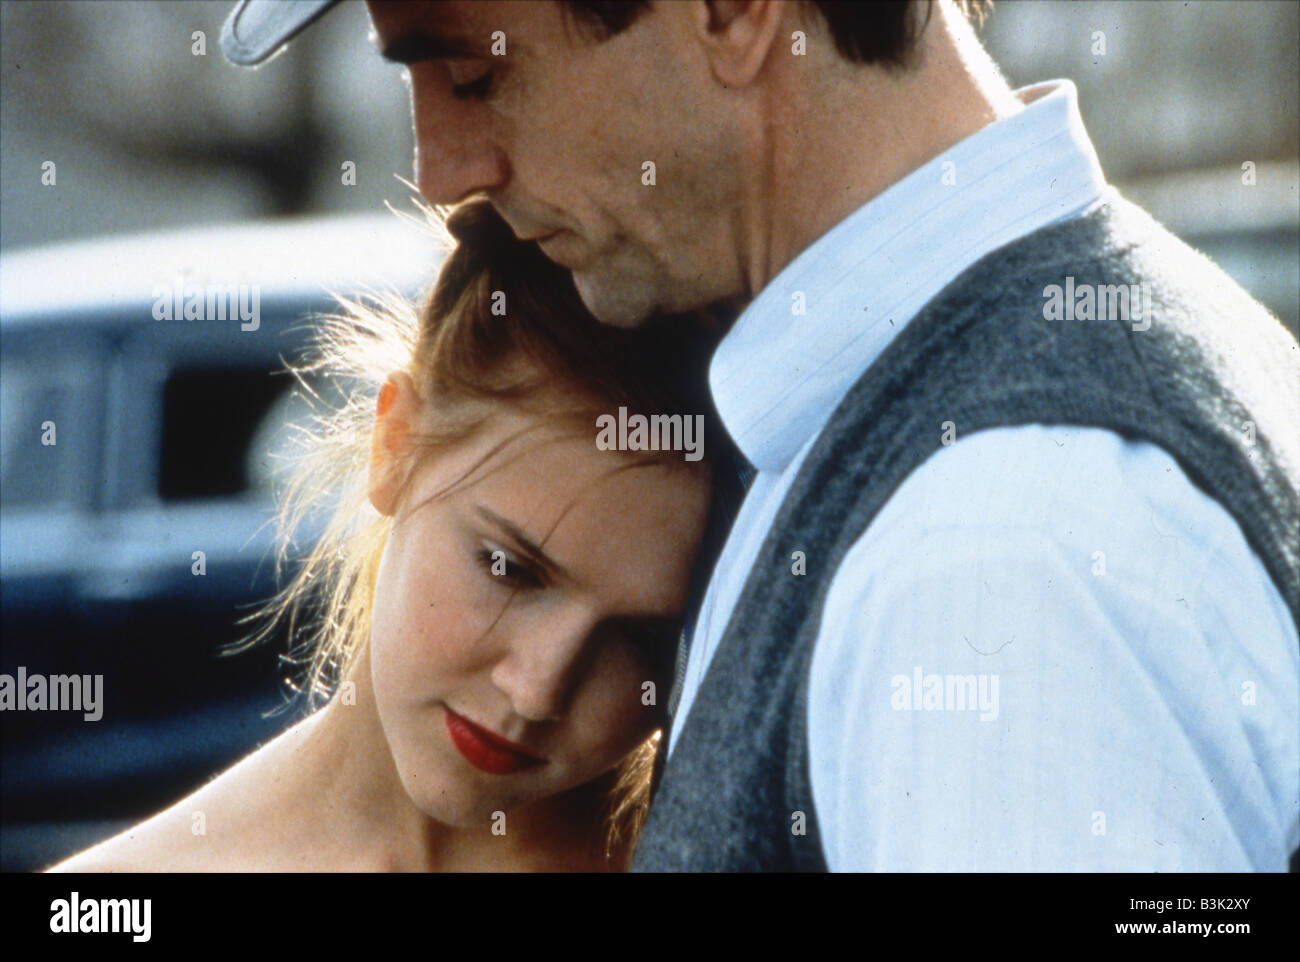 LOLITA 1997 Pathe film with Dominique Swaim and Jeremy Irons Stock Photo -  Alamy